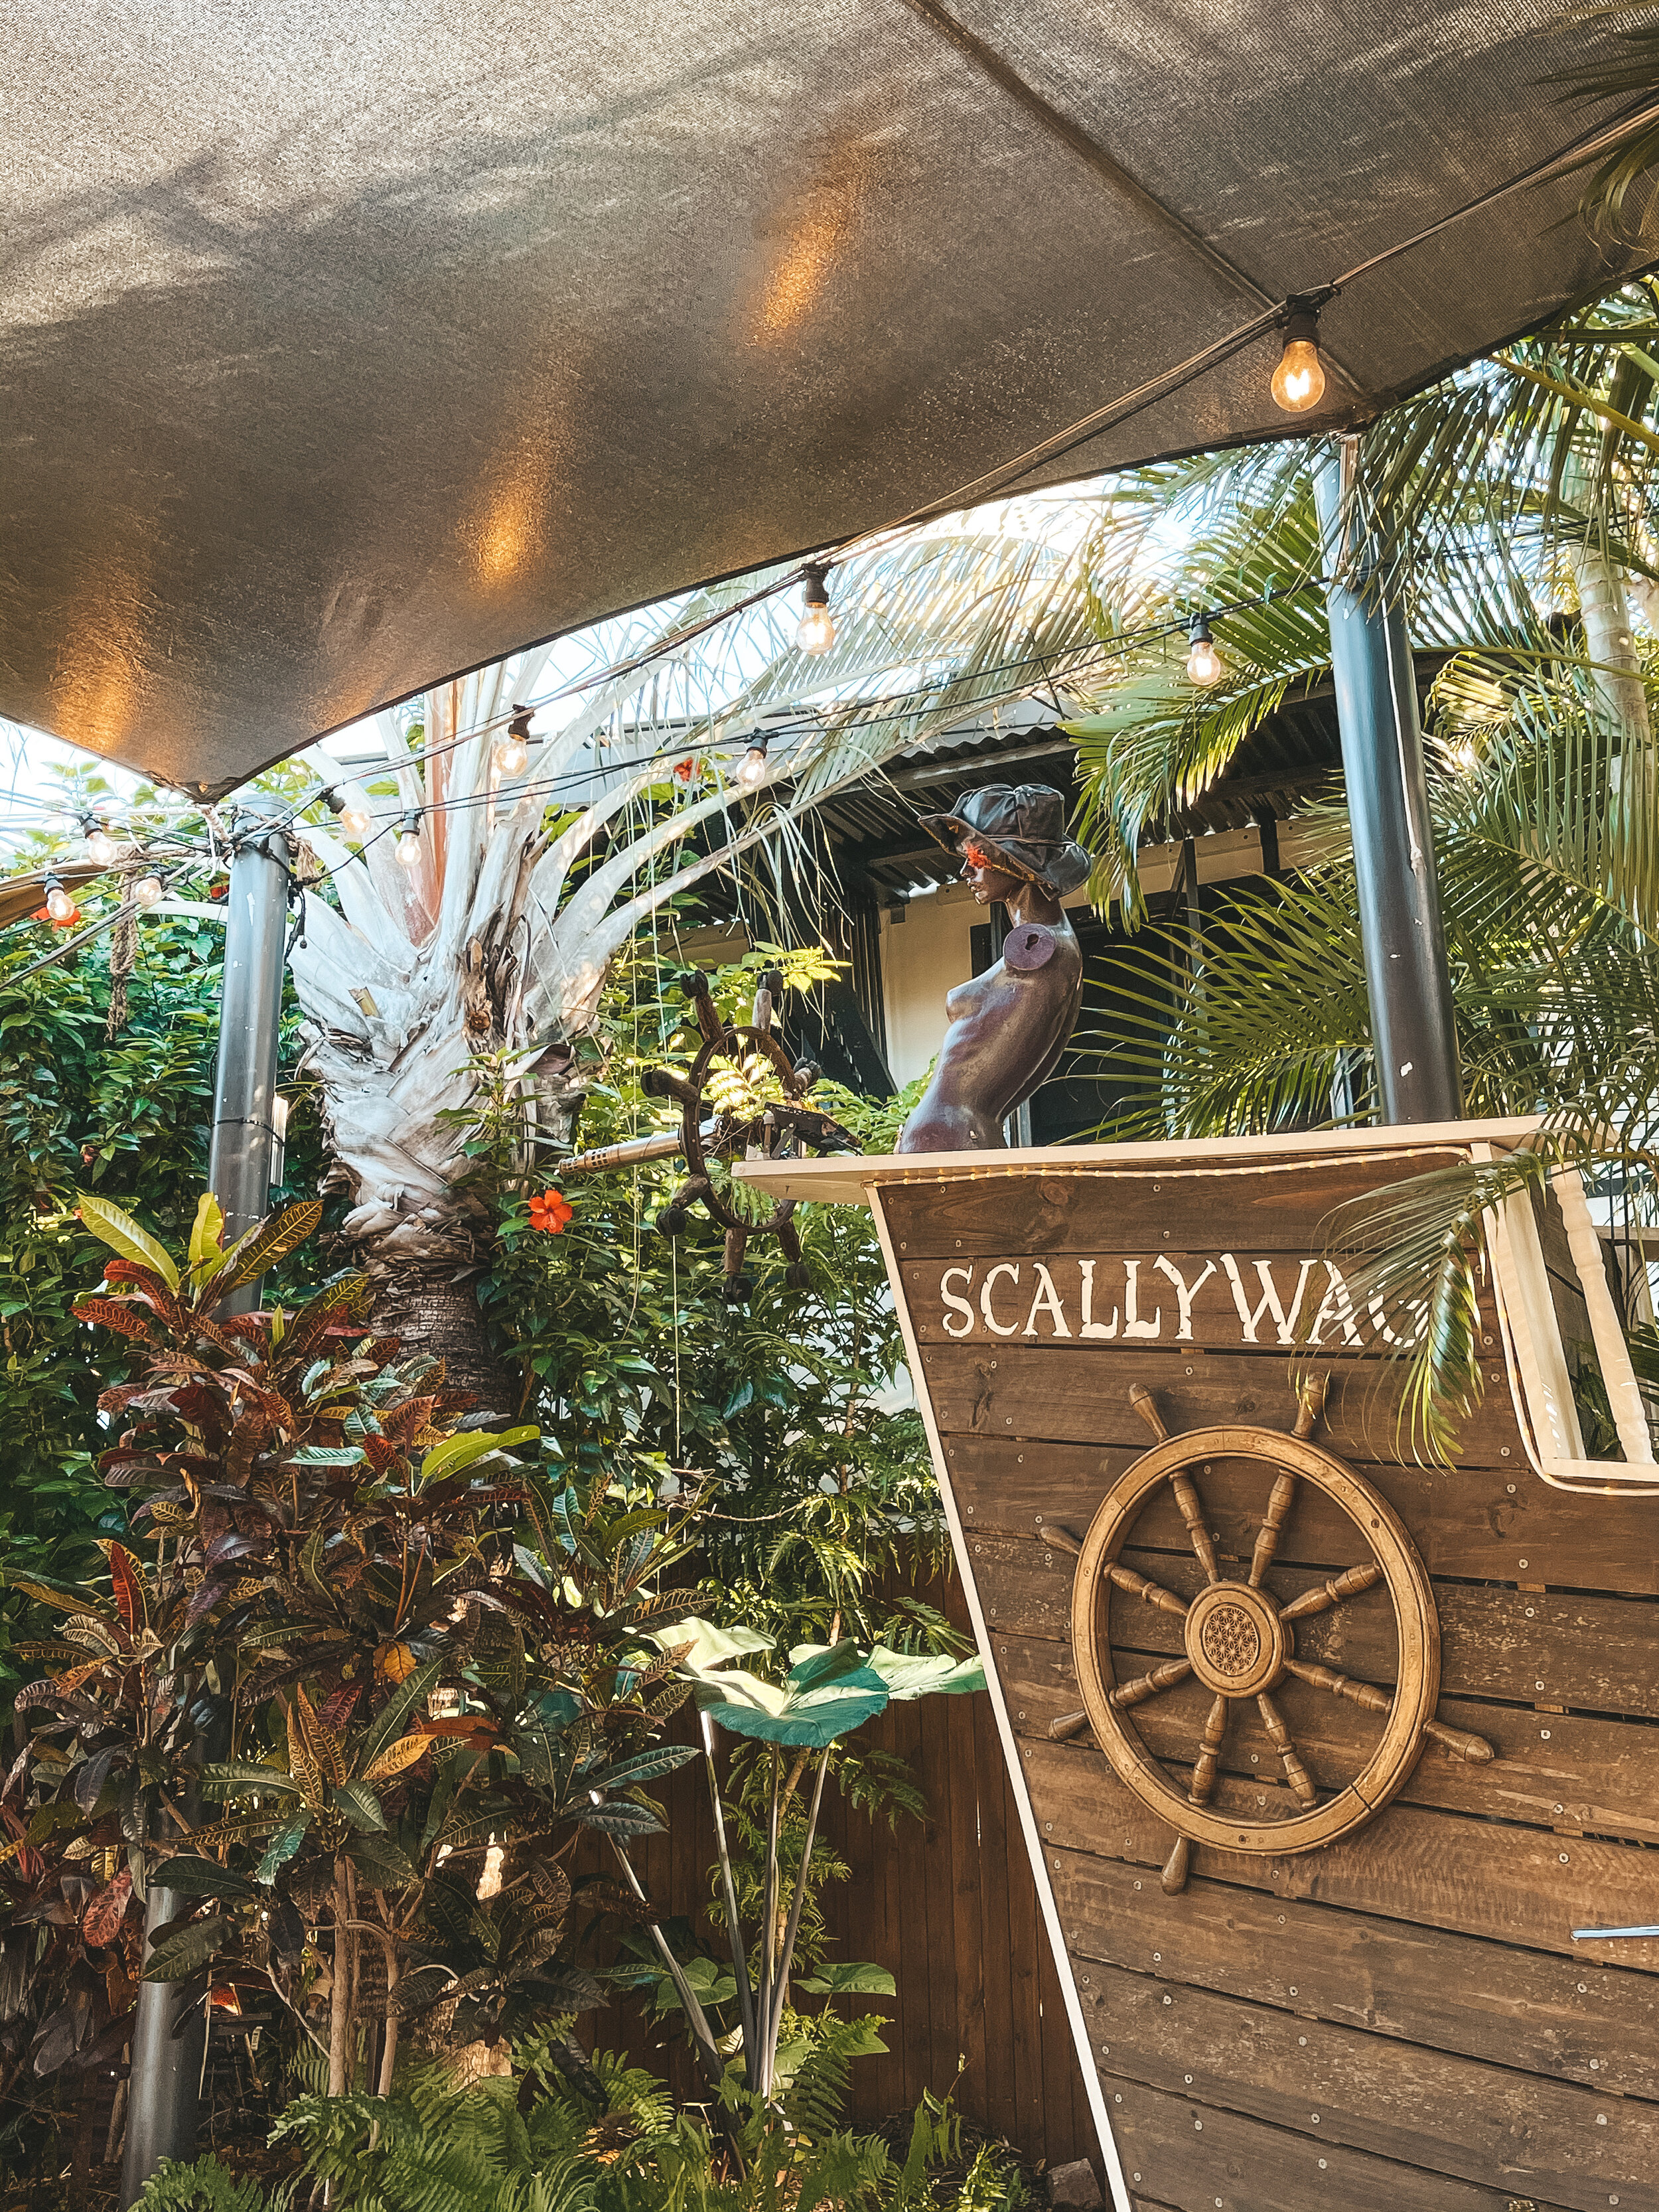 Scallywags Restaurant - Magnetic Island (Maggie) - Townsville - Tropical North Queensland (QLD) - Australia